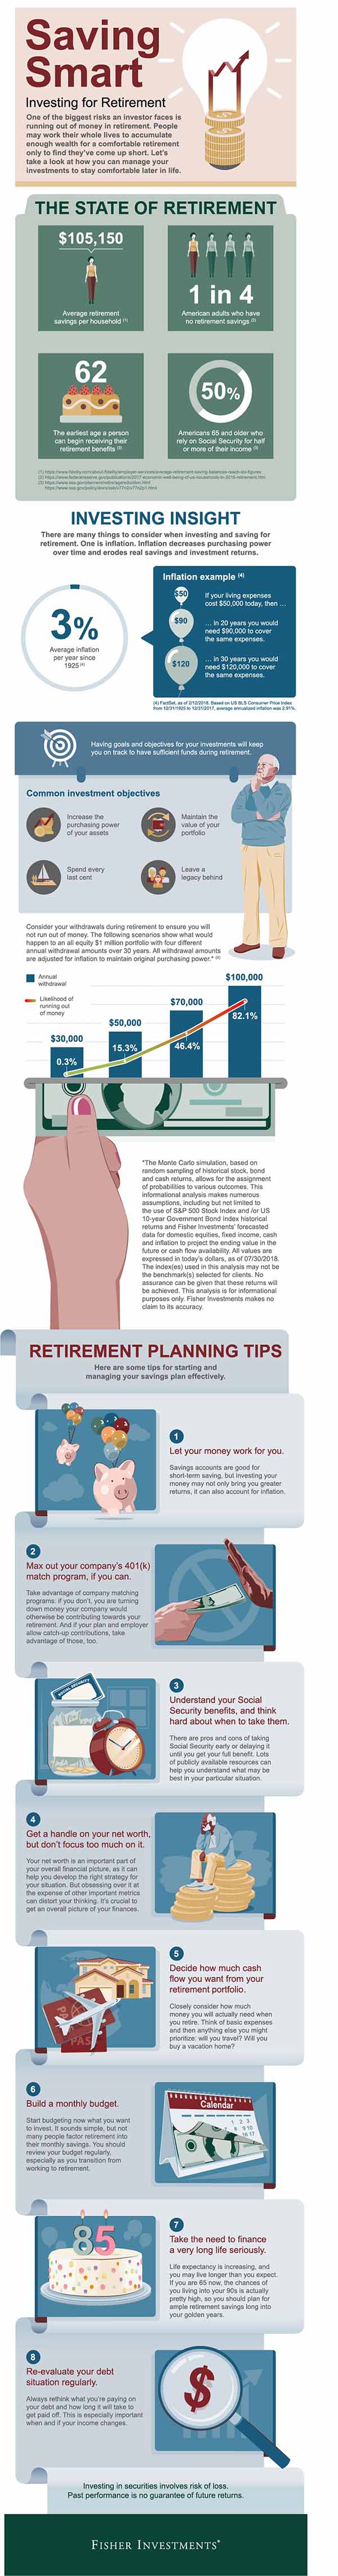 Informational graphic detailing retirement planning tips